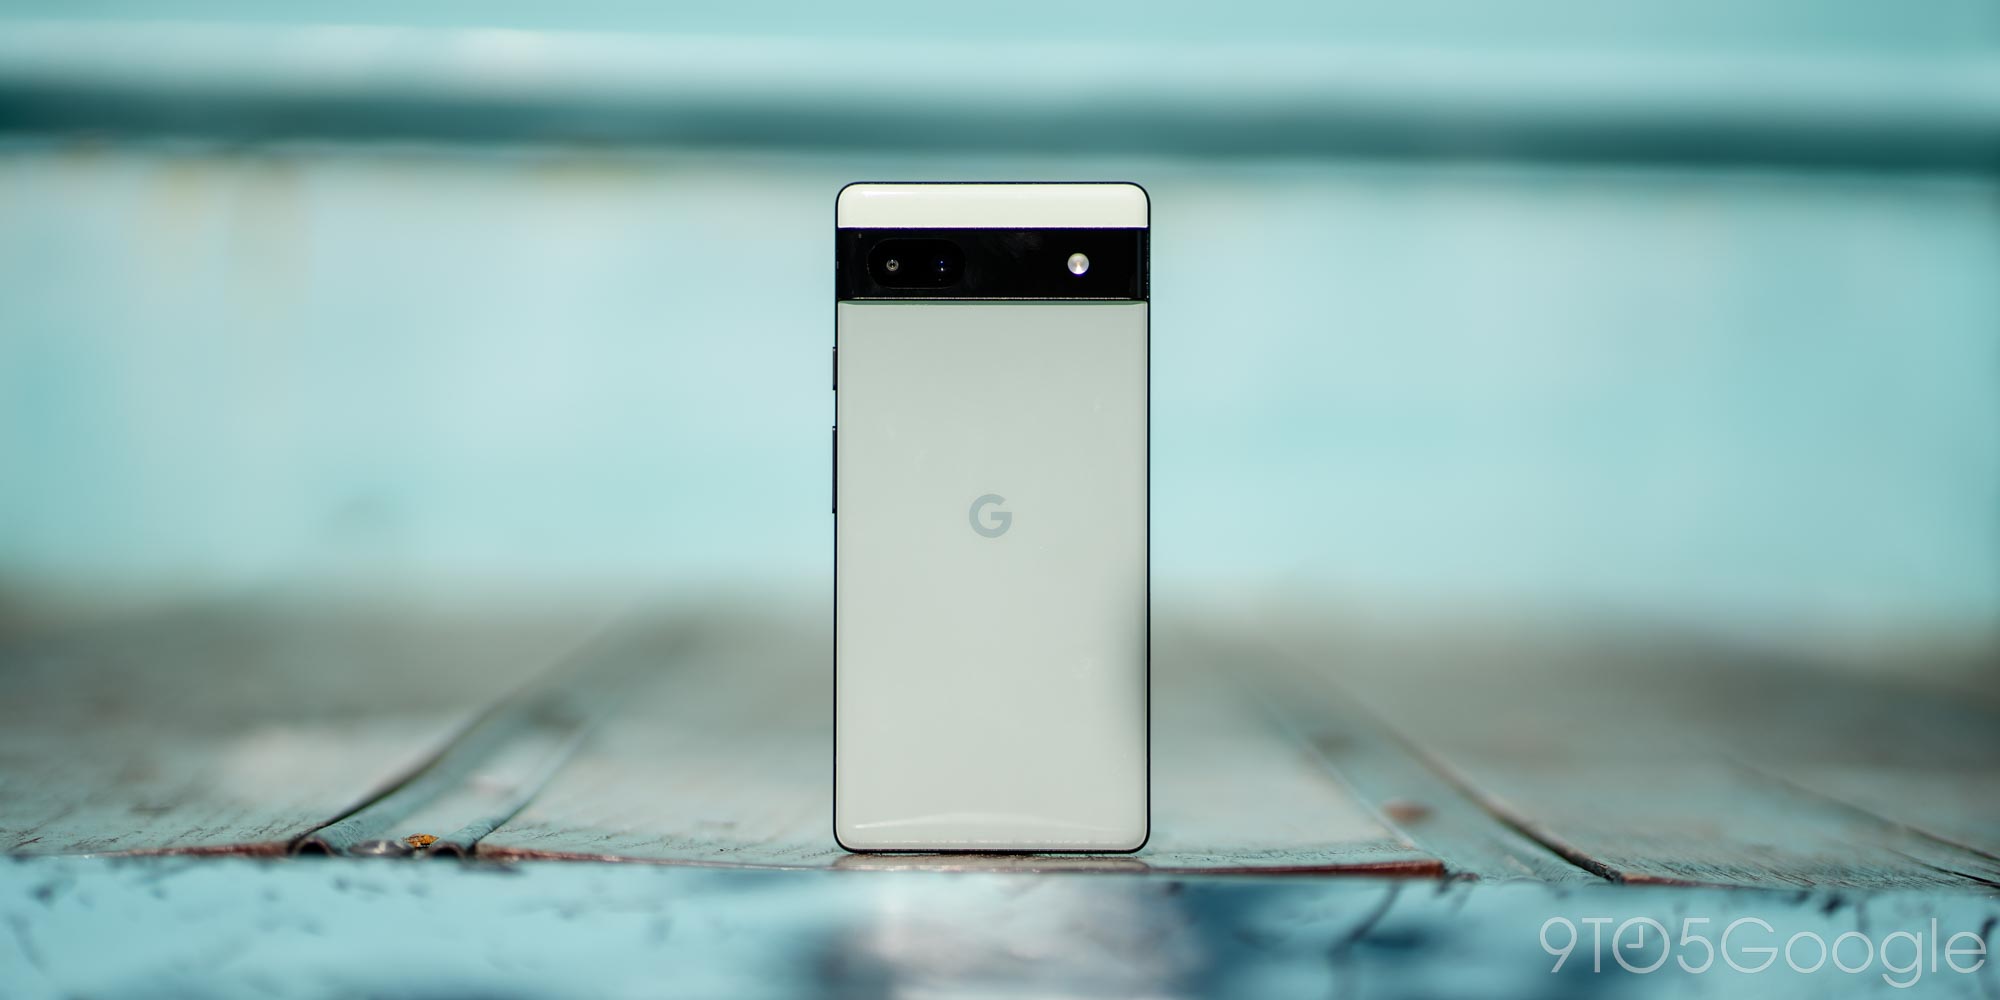 Google Pixel 6a Review: Just in time to replace the 3a [U